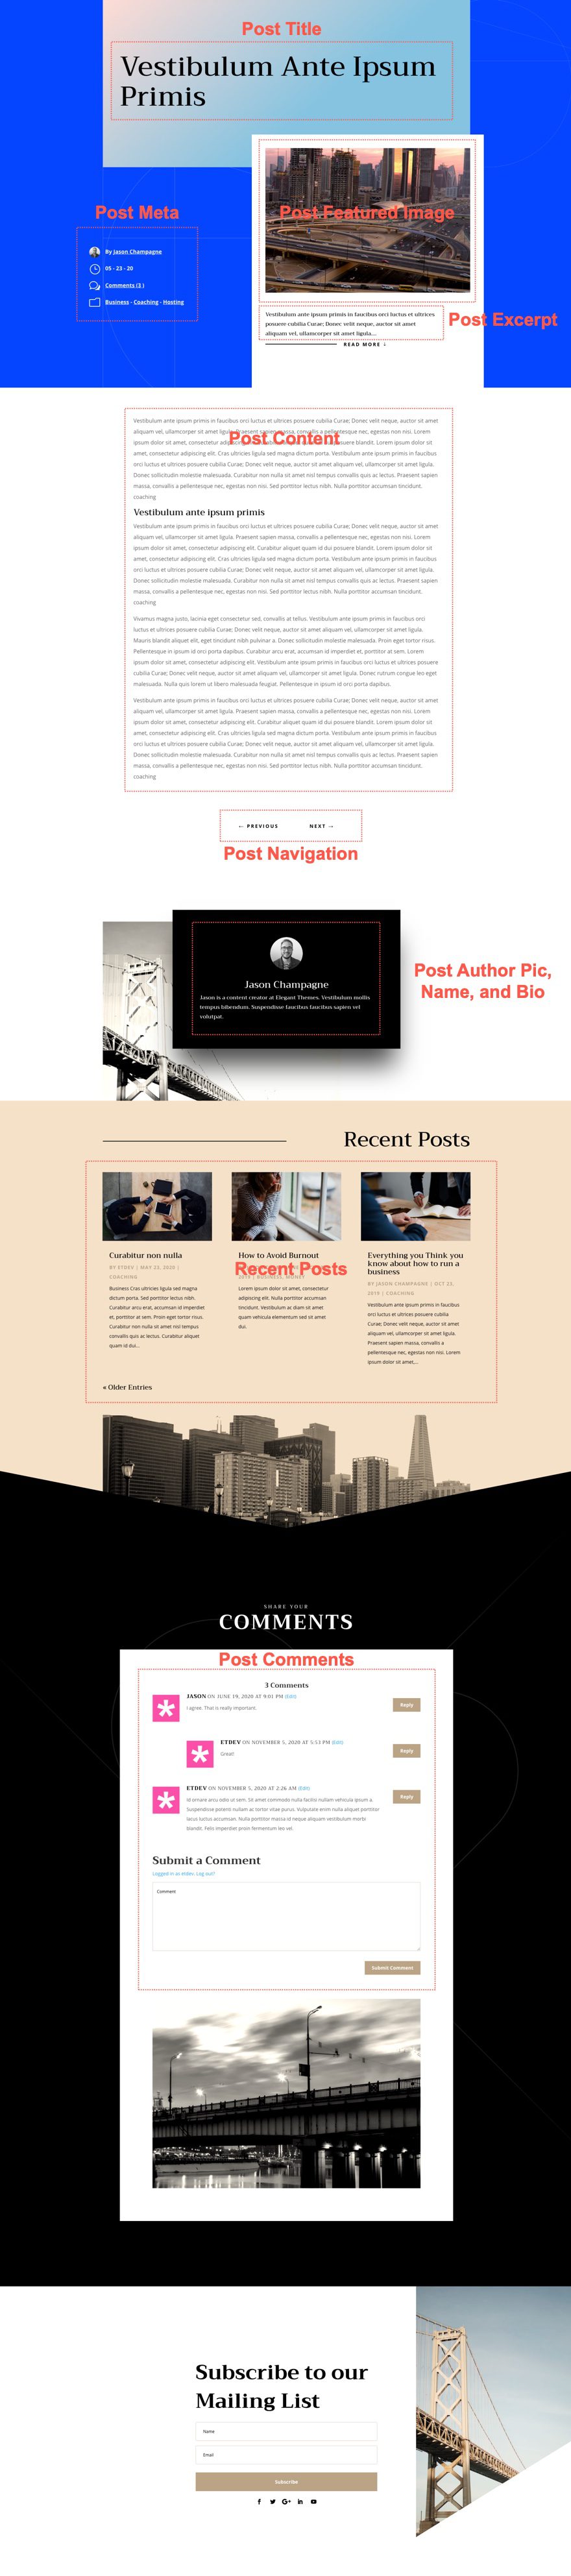 engineering firm blog post template